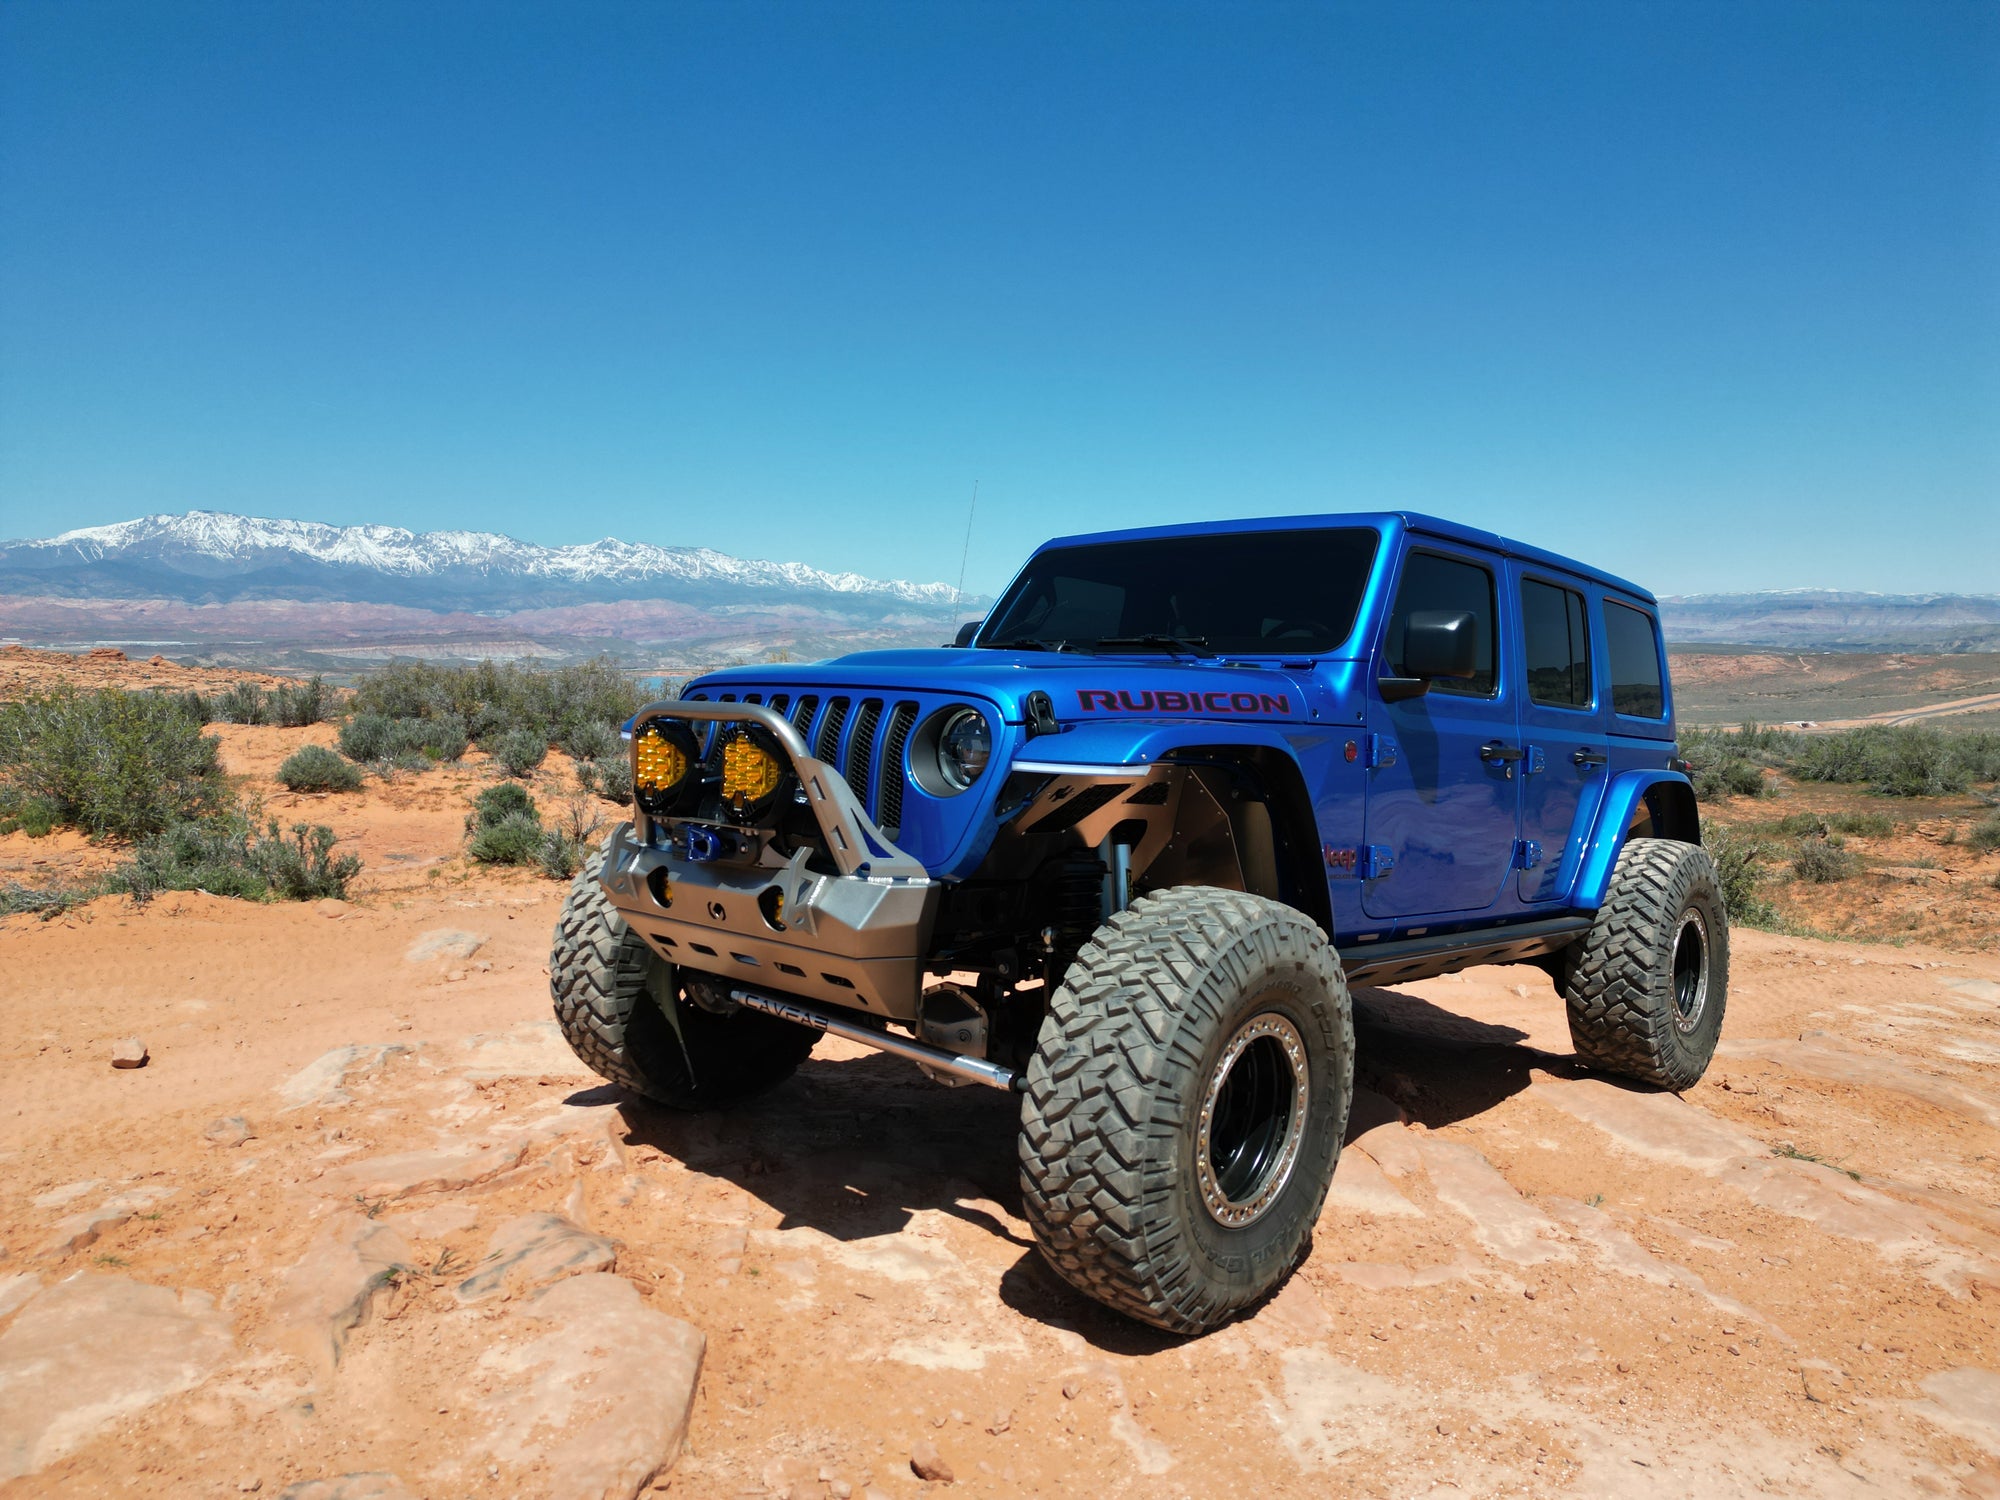 Jeep JL Wrangler, Spare Tire Carrier, Bumpers, Steering, and Armor For The Trail.